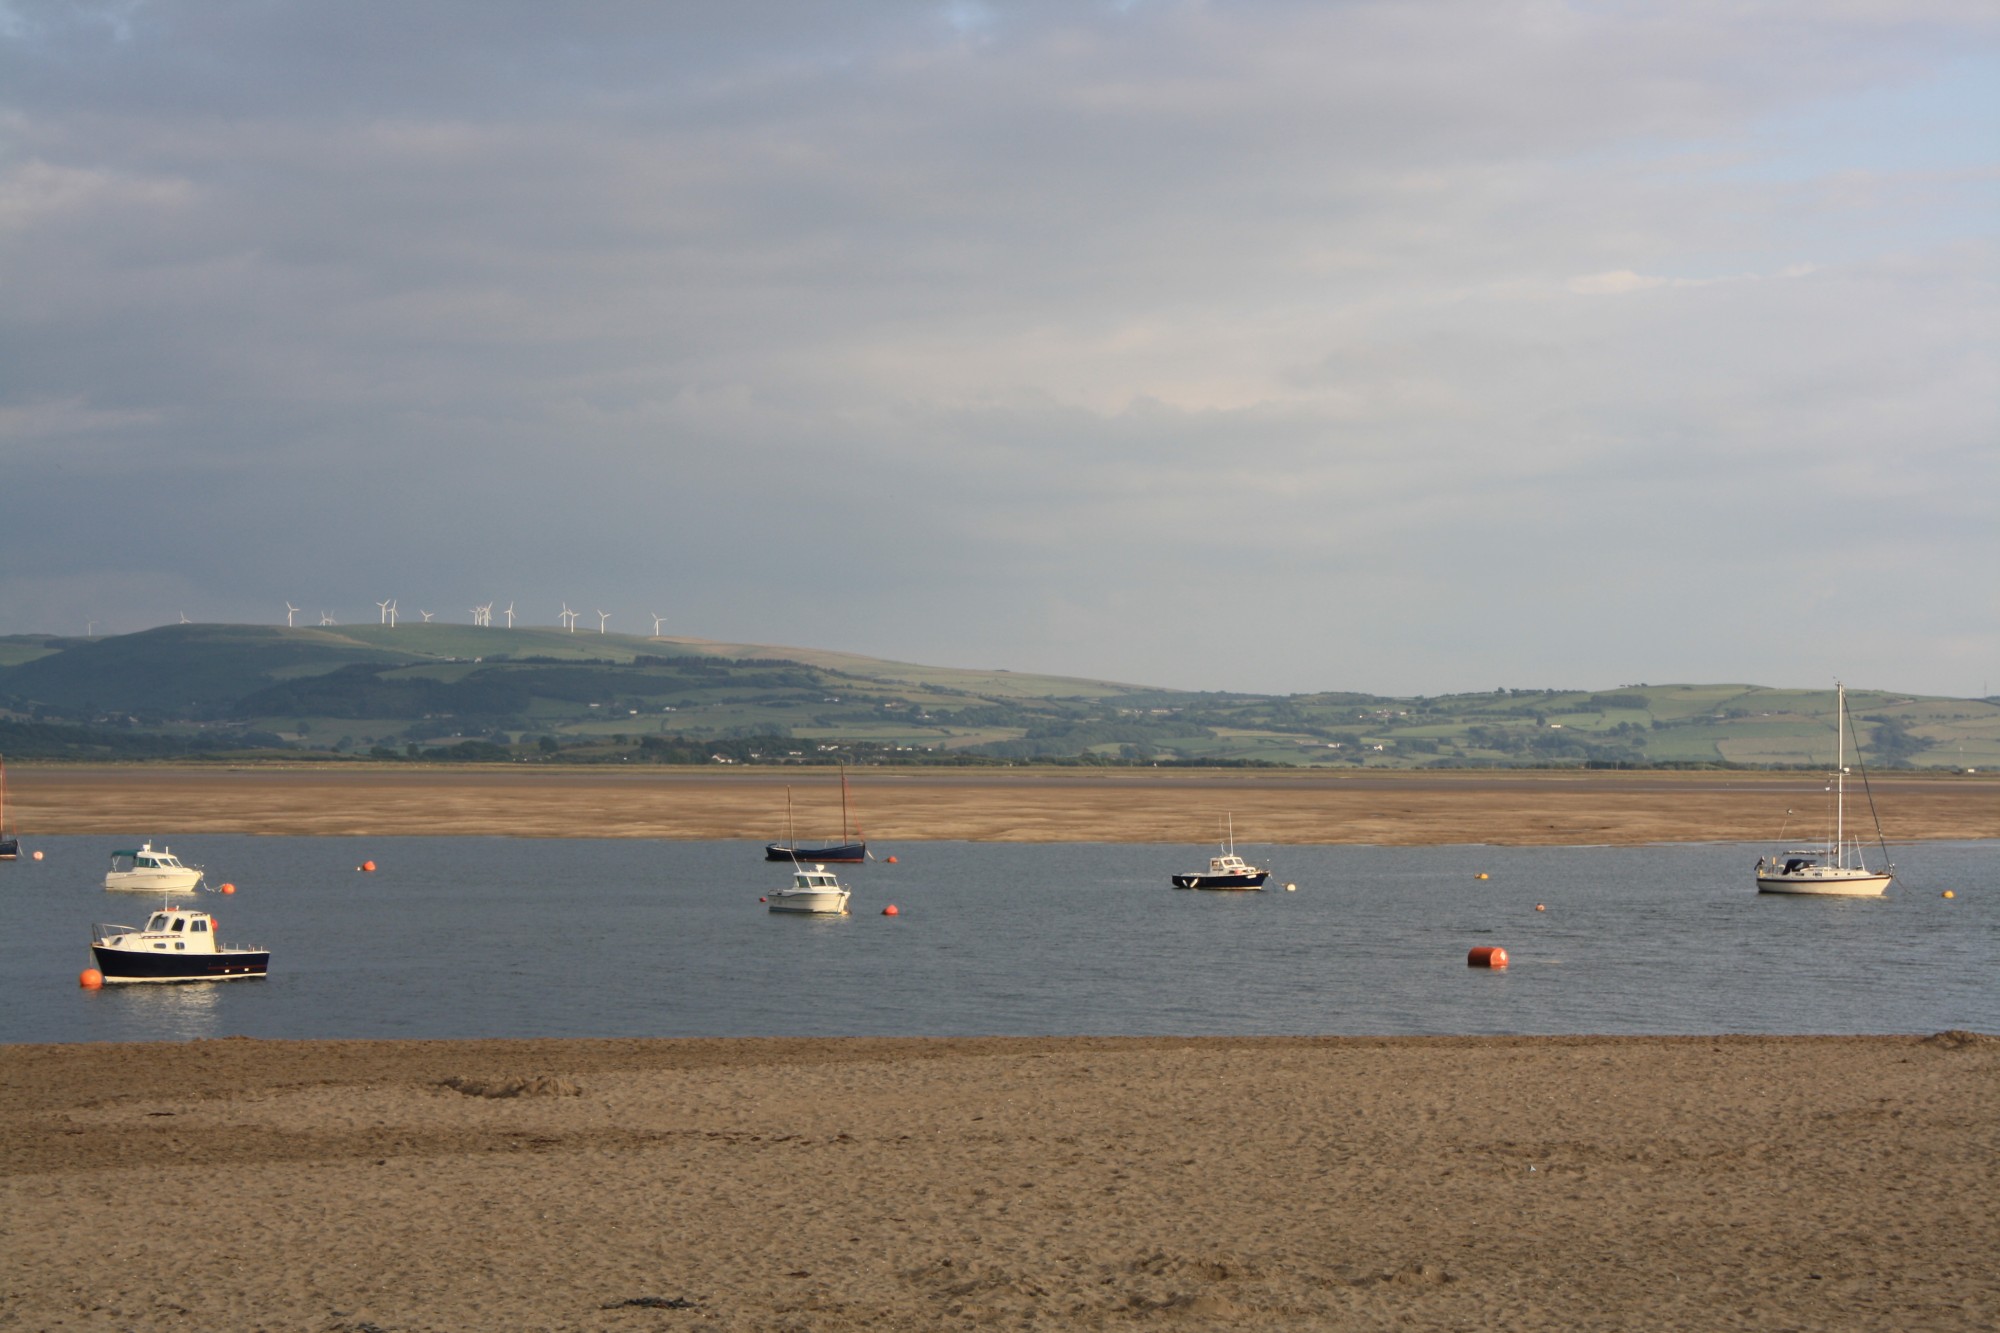 A view over Aberdovey estuary as the tide turns.